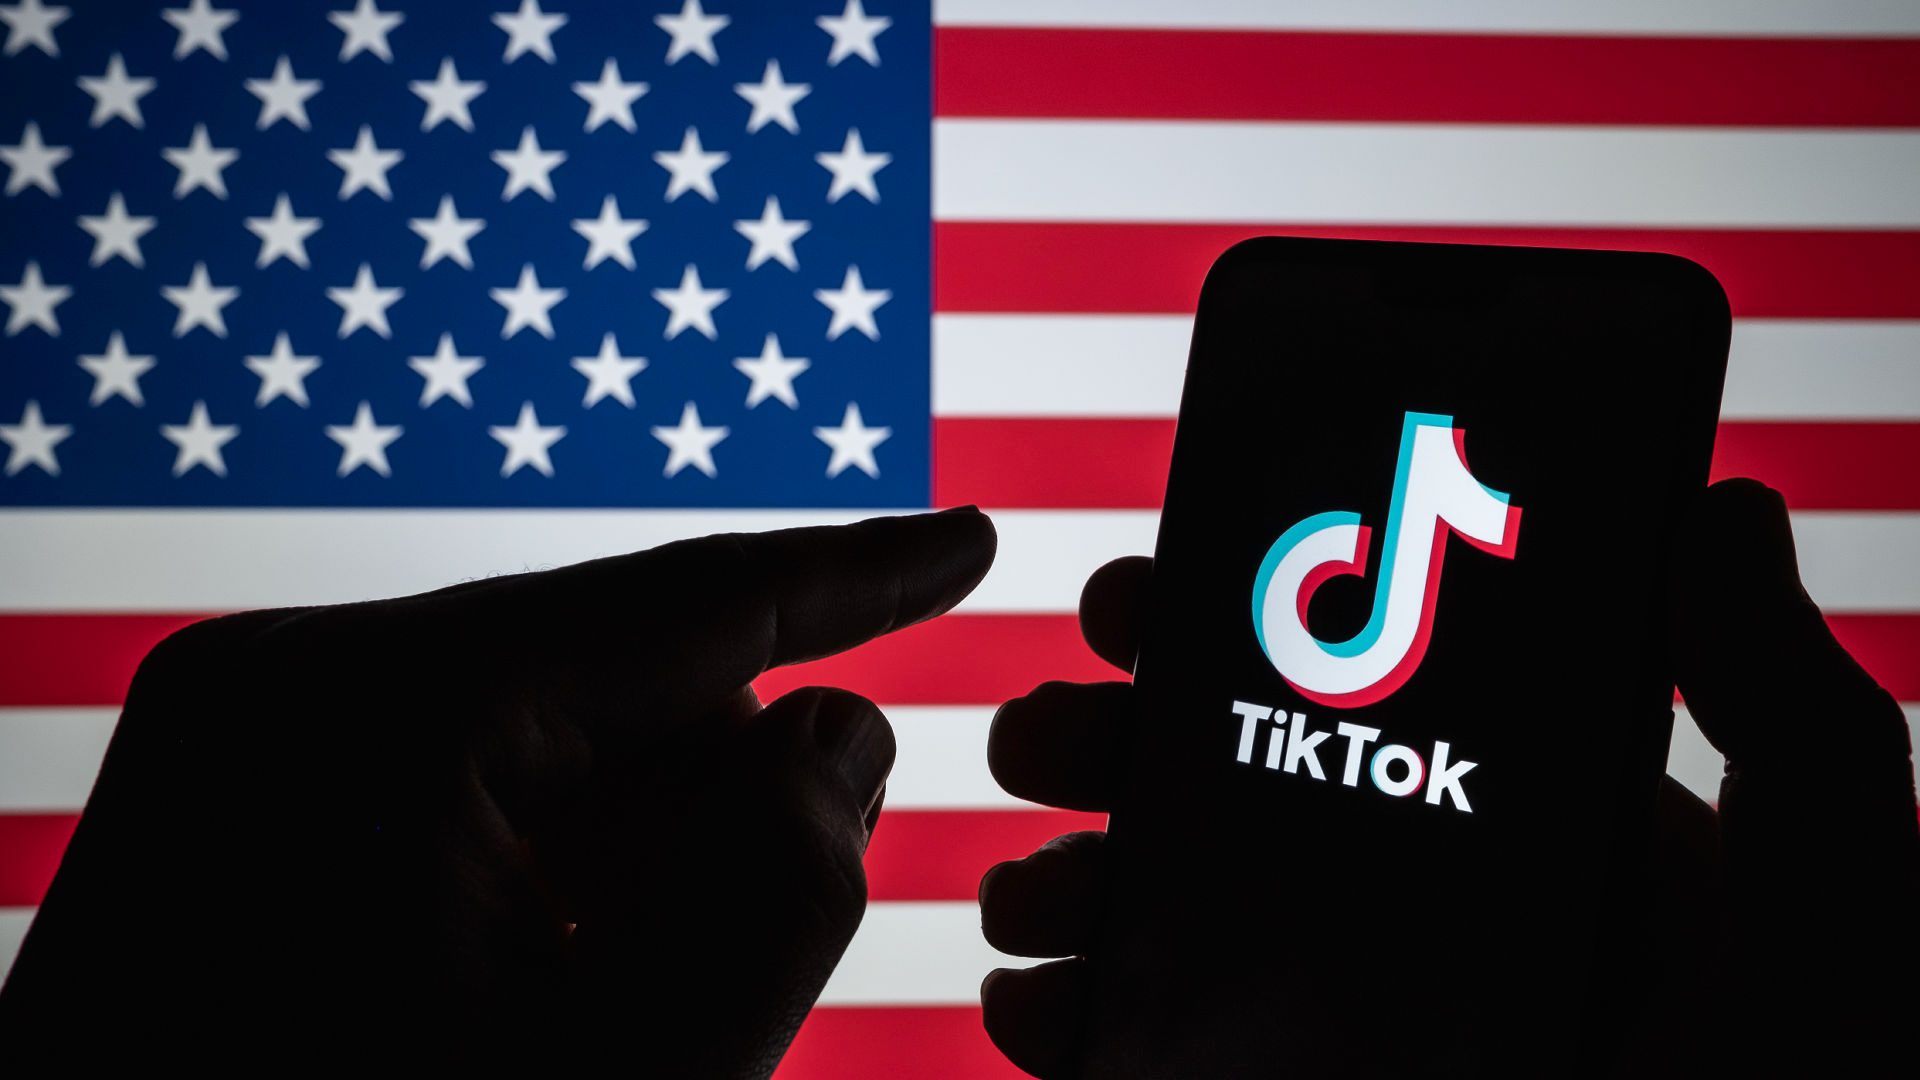 Maryland governor bans use of TikTok on state devices